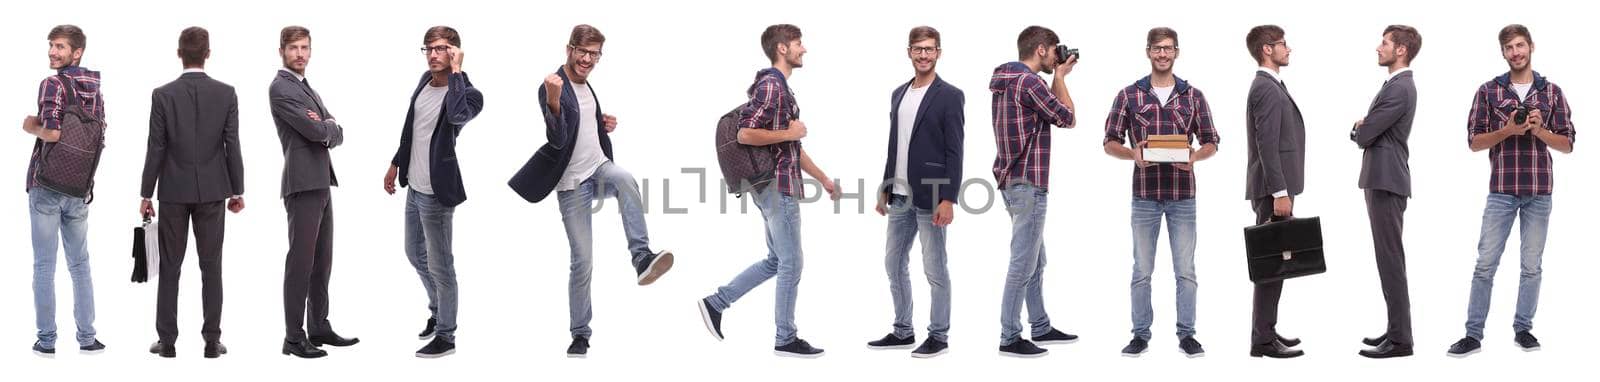 panoramic collage of a promising young man by asdf